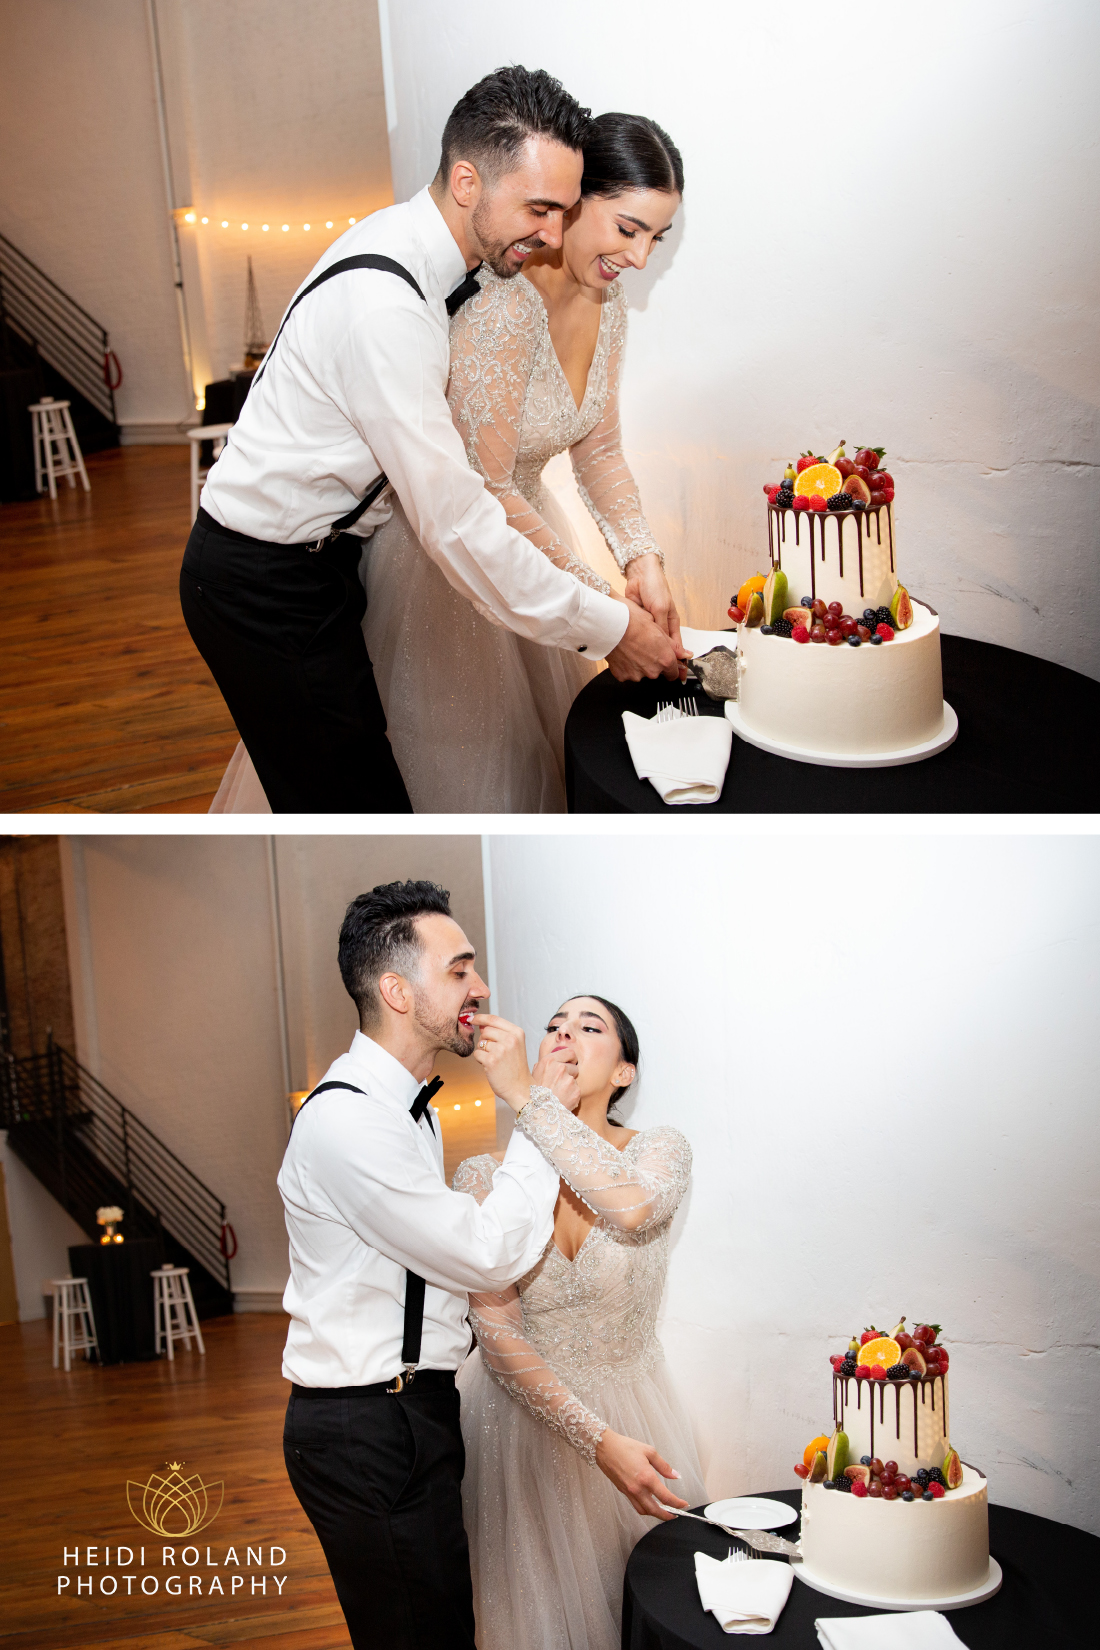 Bride and groom cutting fruit-covered wedding cake from philadelphia bakery